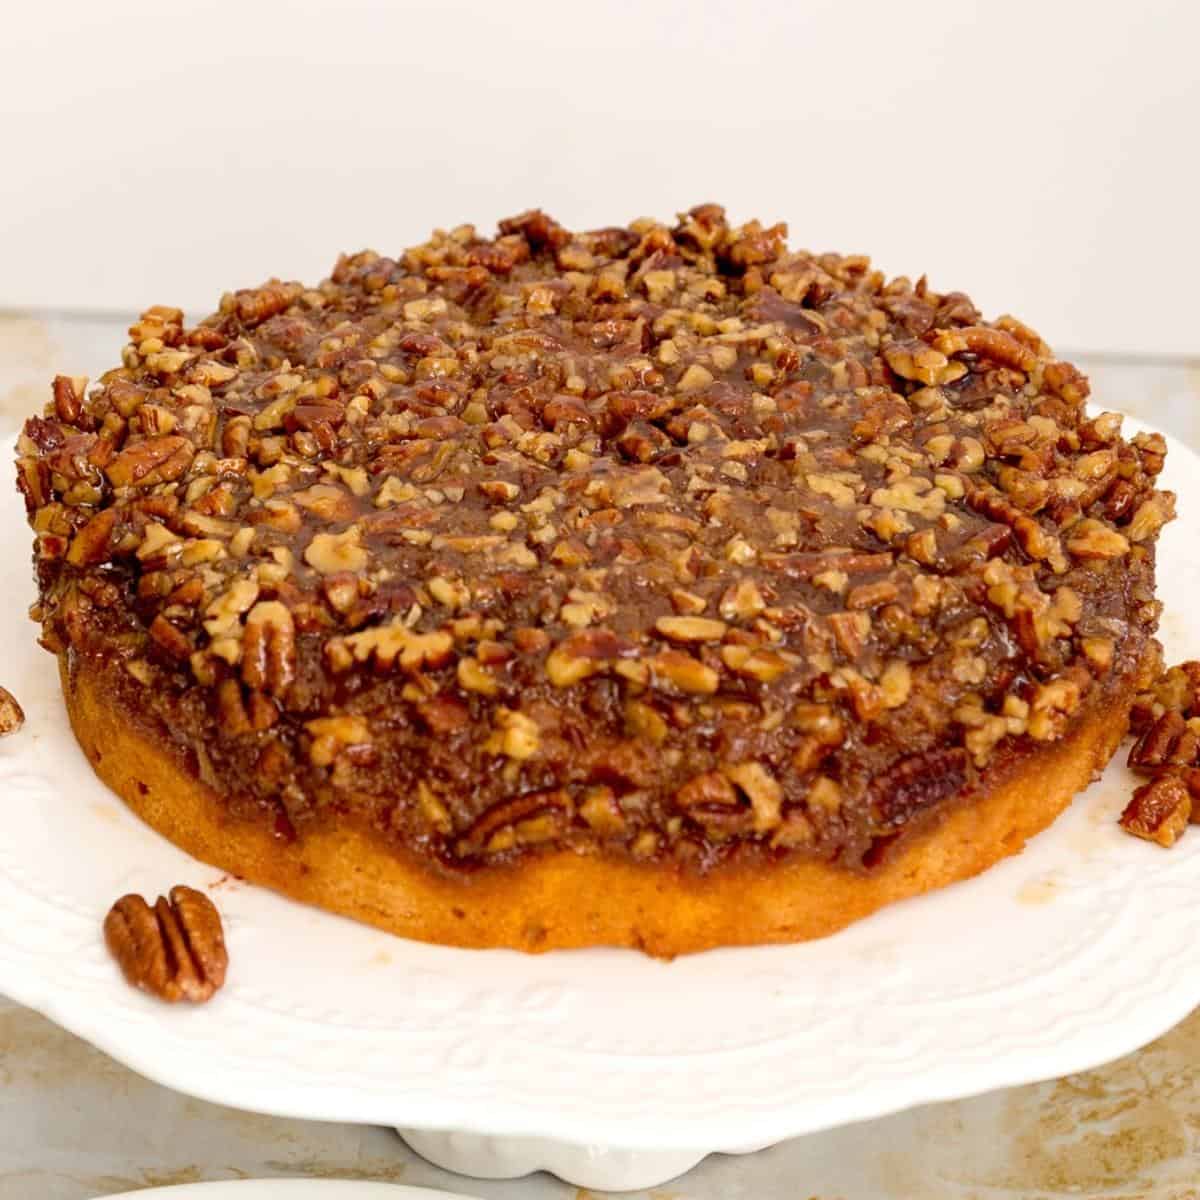 Pecan pie cake inverted on a cake stand.